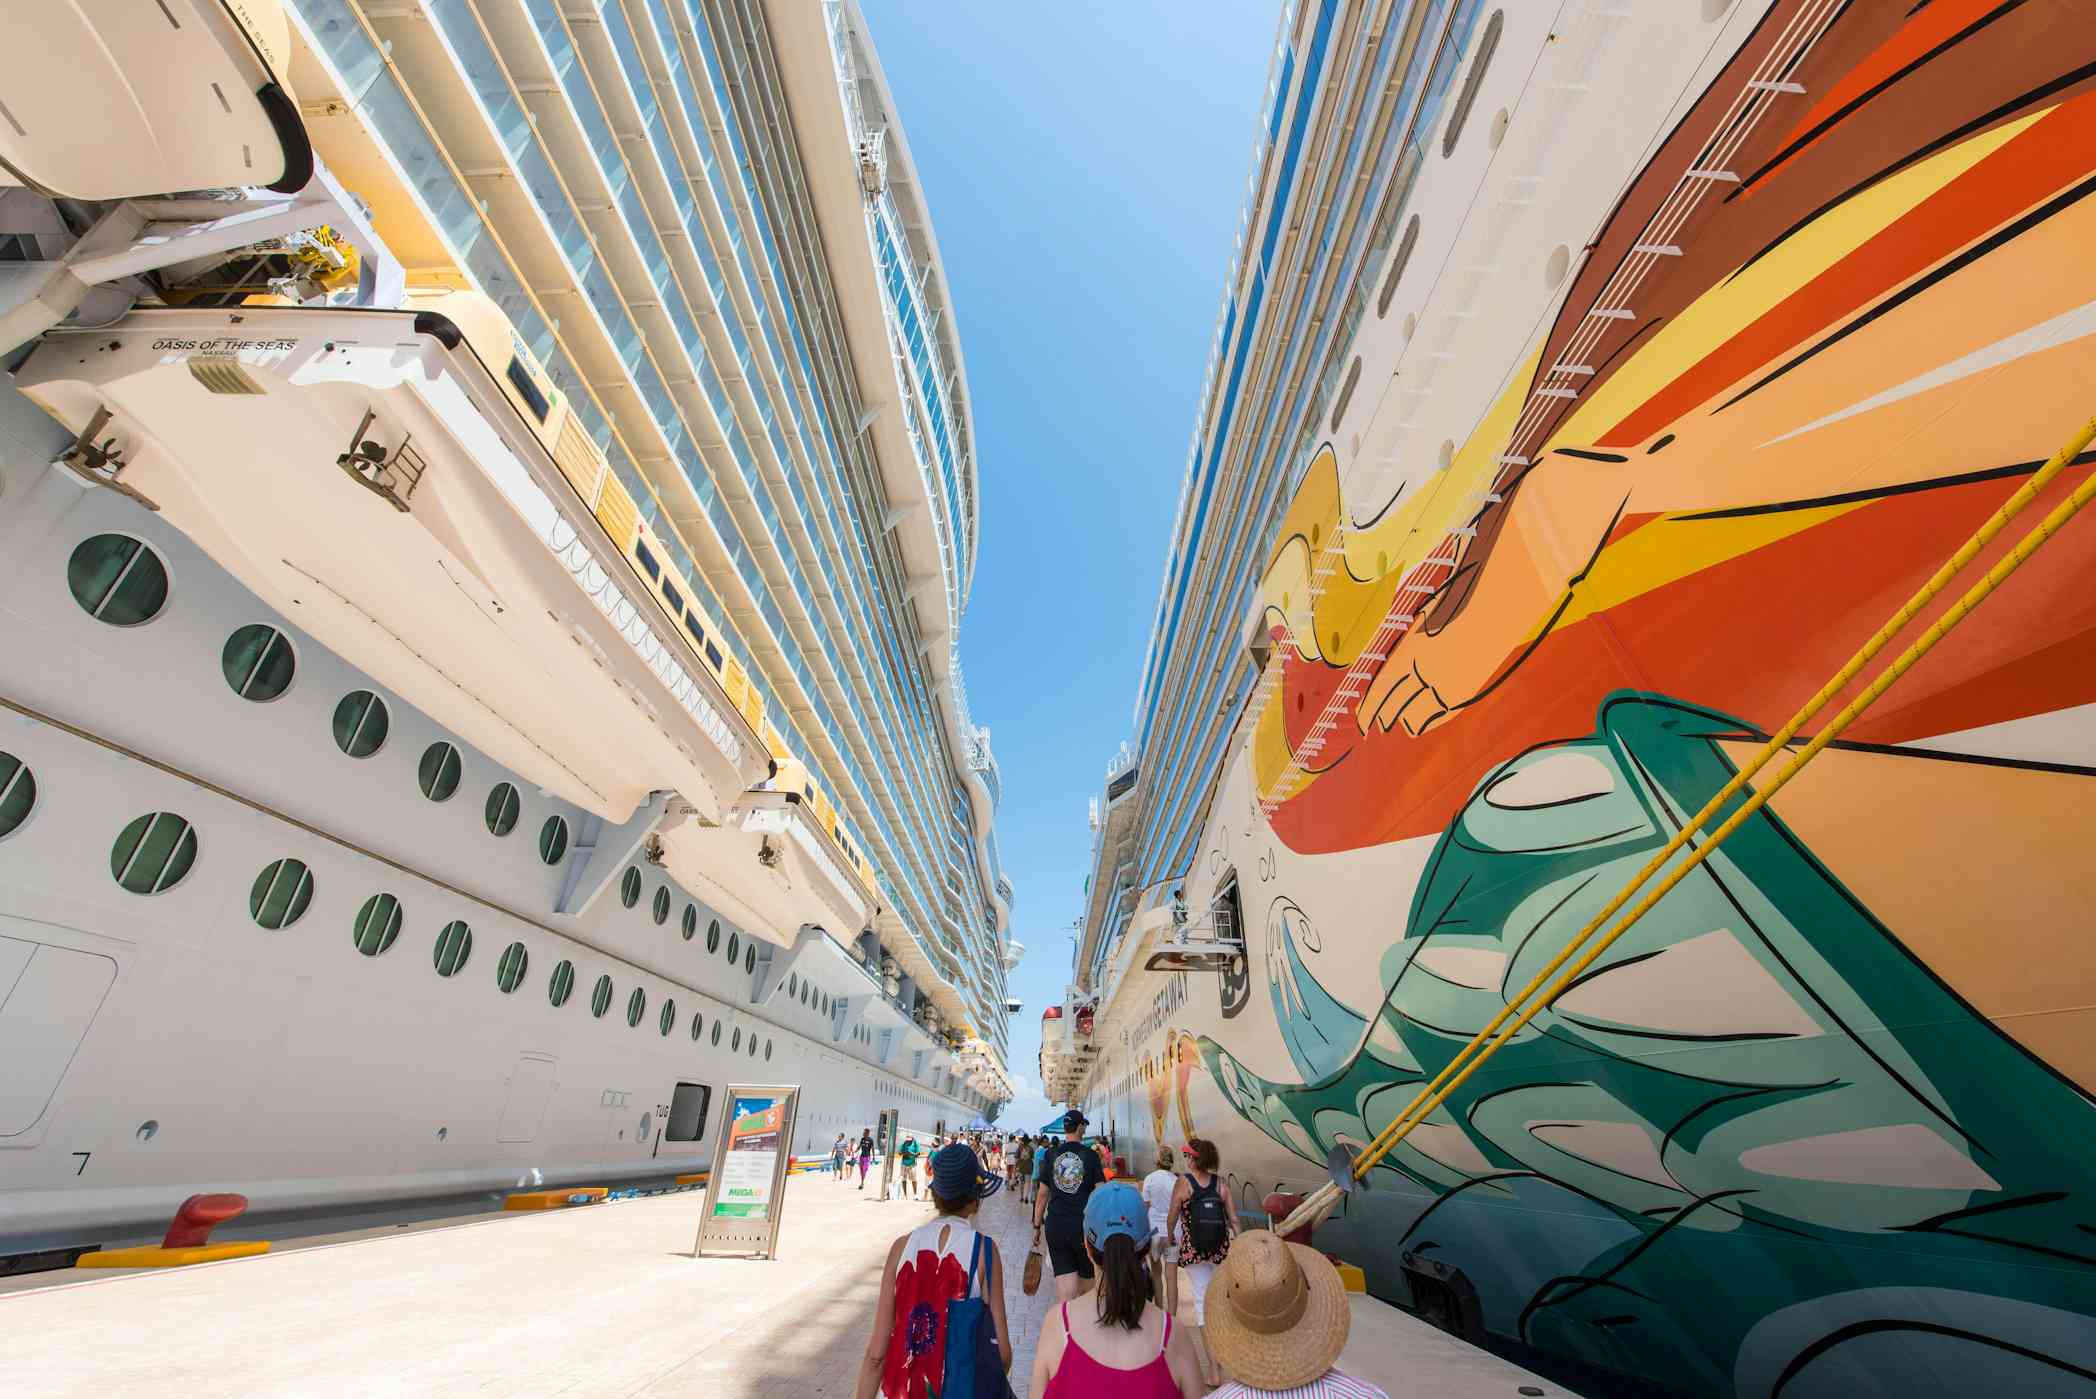 5 Surprising Items That Are Banned From Most Cruise Ships